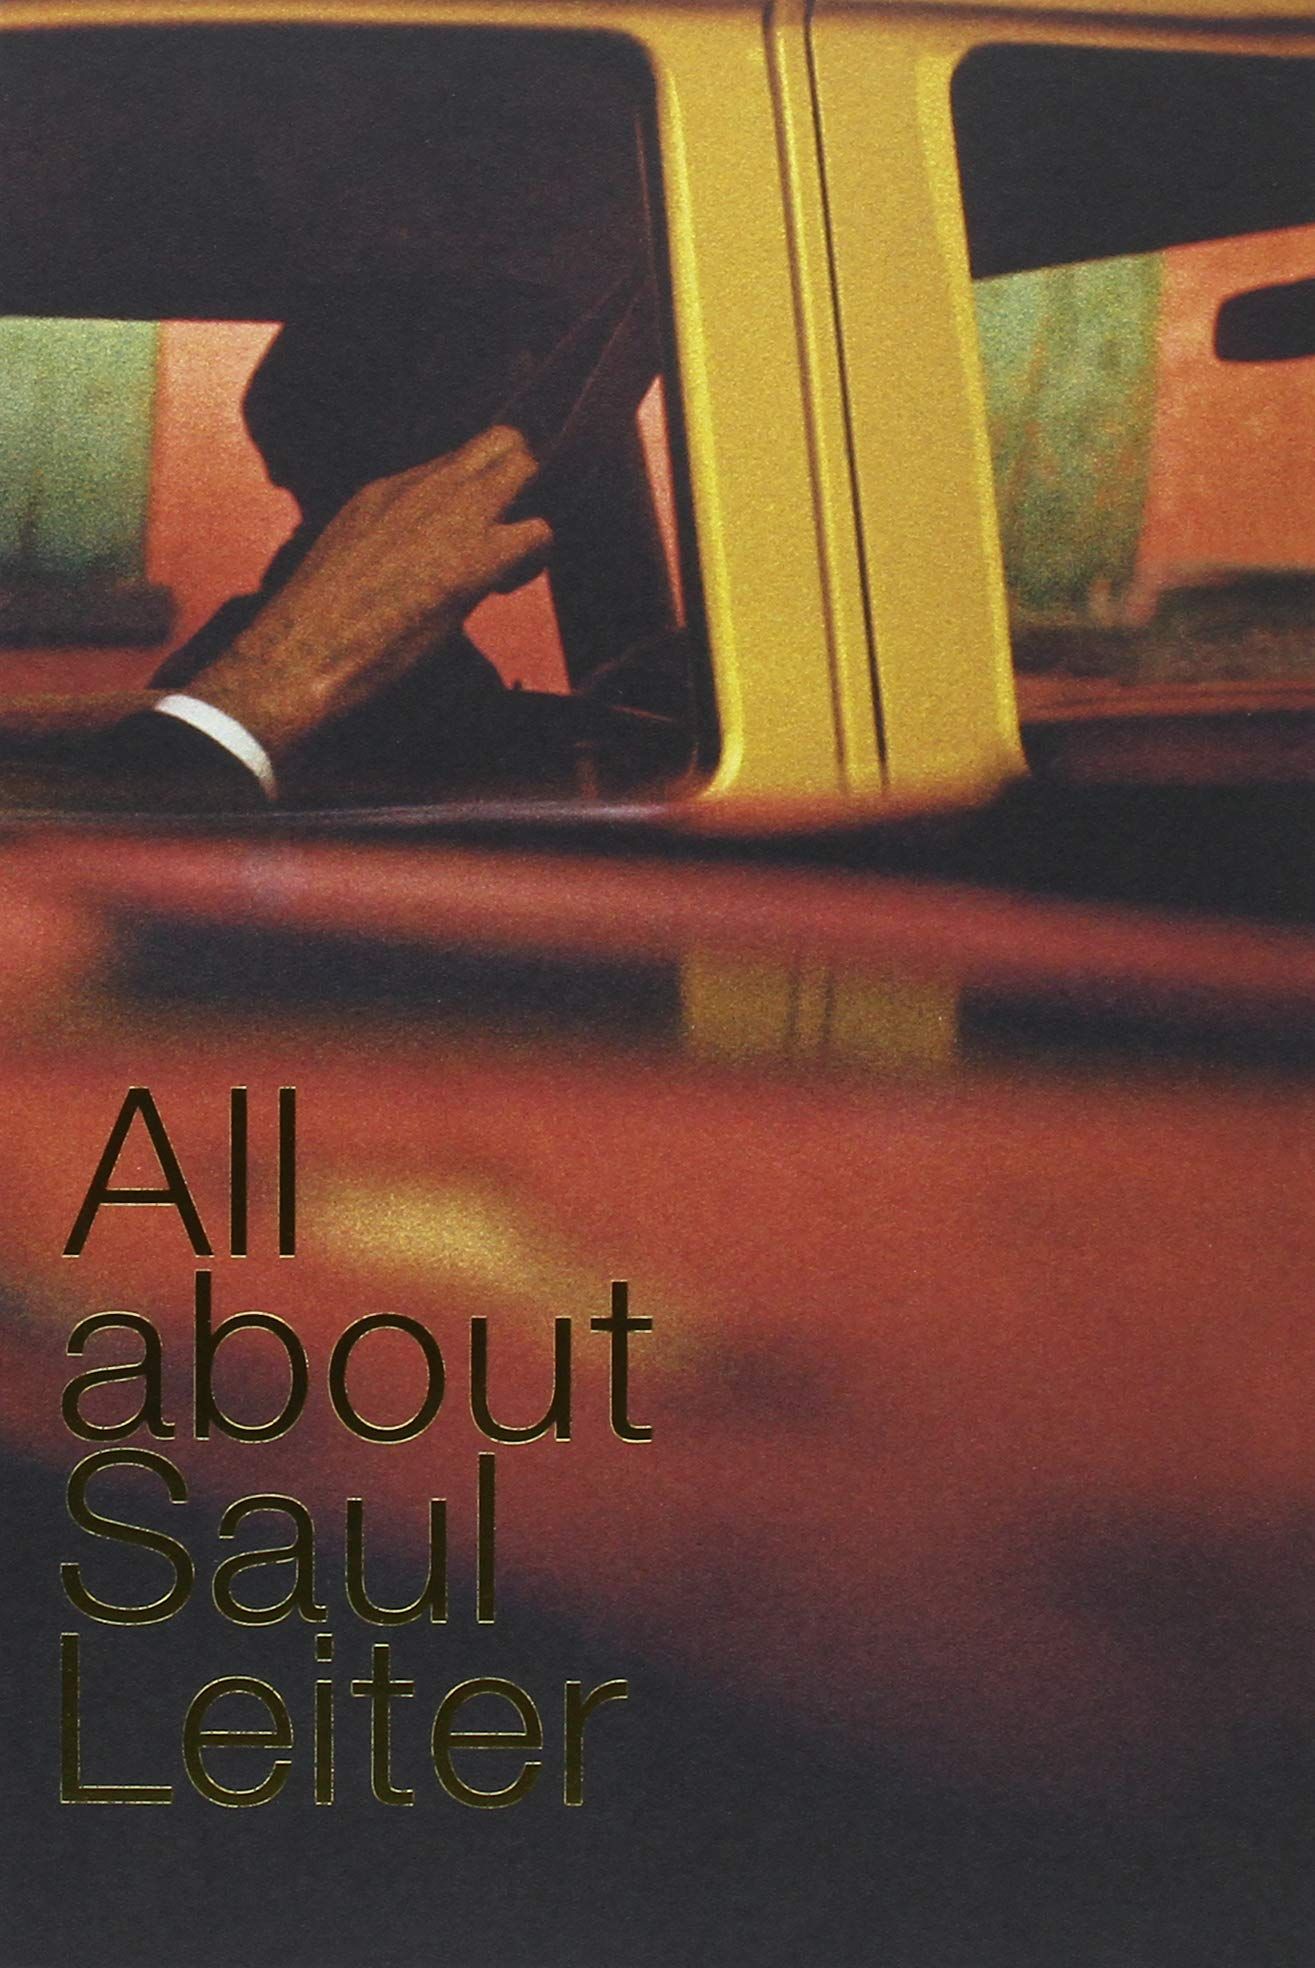 Saul Leiter by Saul Leiter